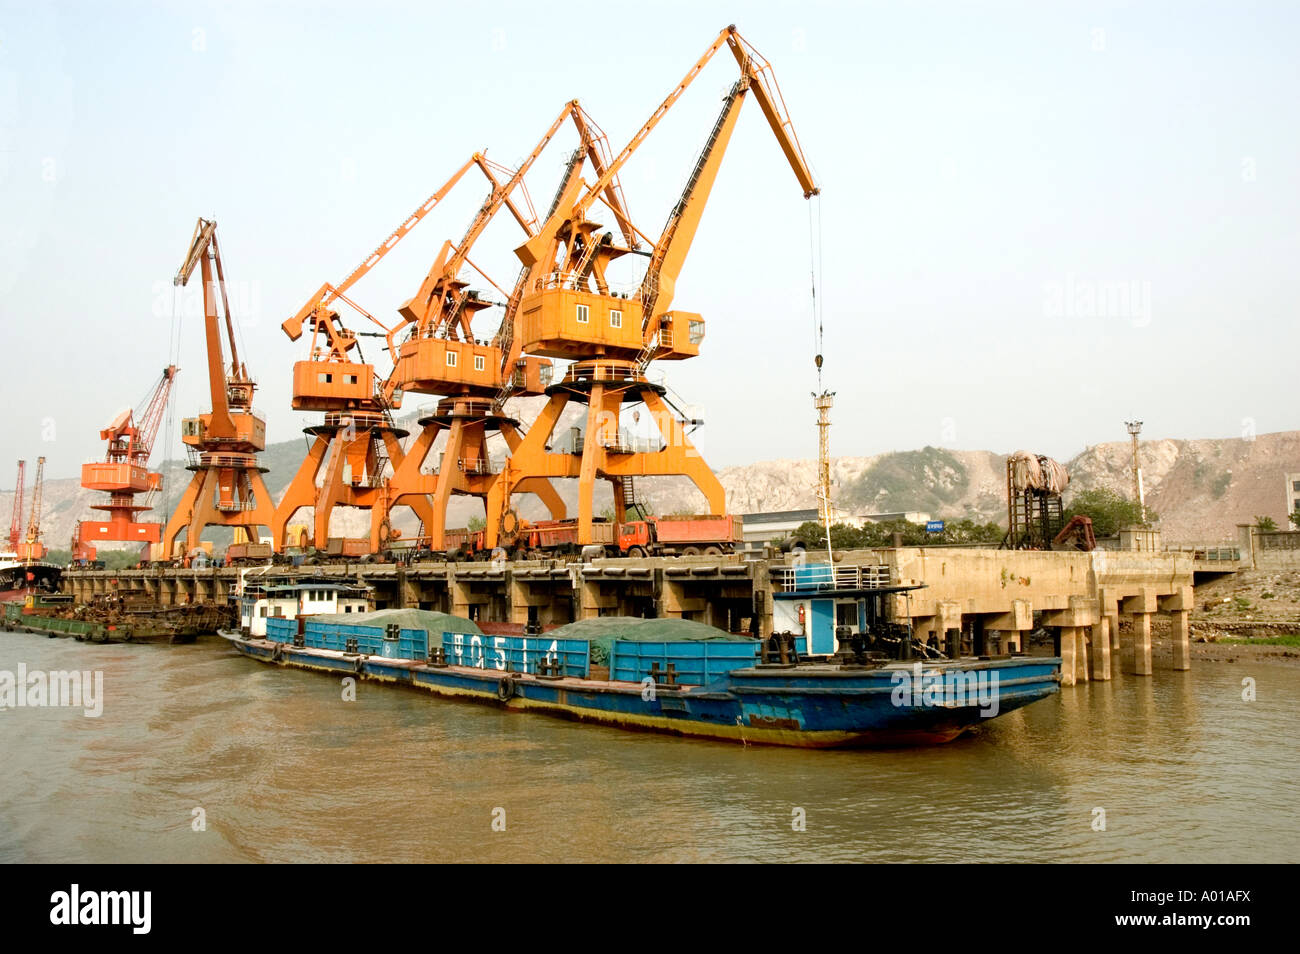 A heavy barge waiting for it's cargo of construction materials to be unloaded at a dockside on the Yangtze River, Nanjing, China Stock Photo